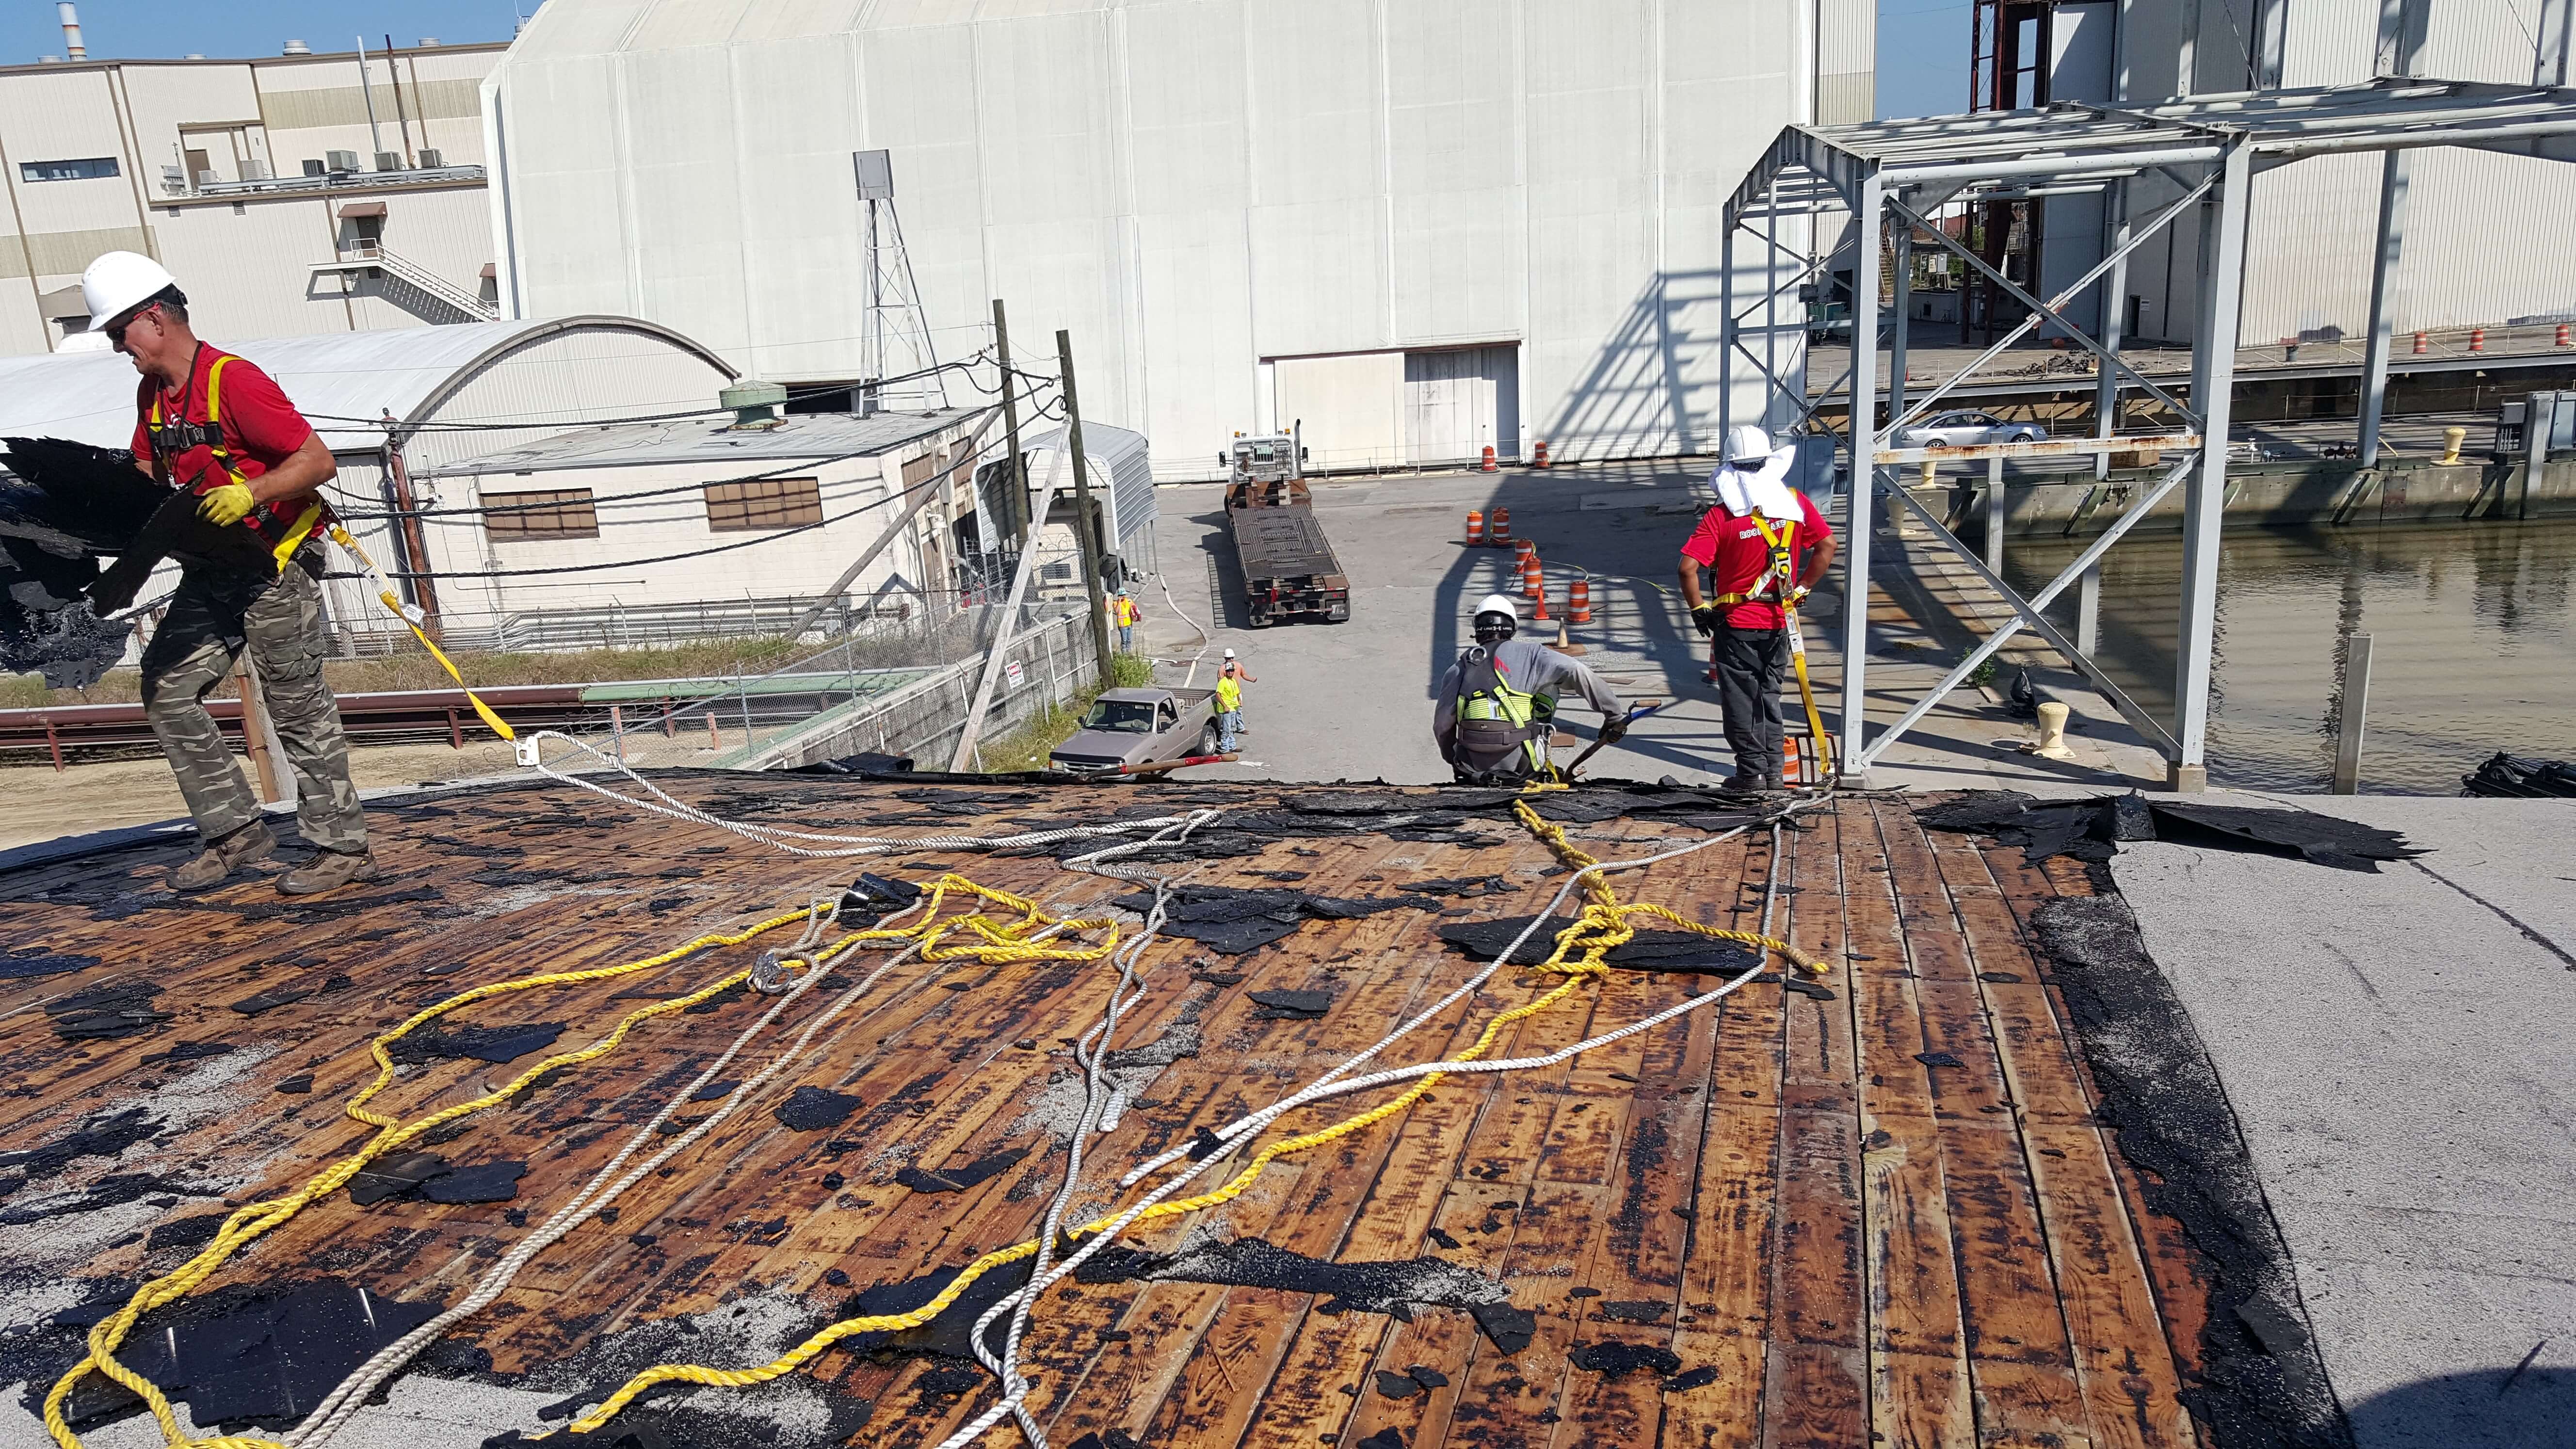 RoofCrafters team replacing a roof